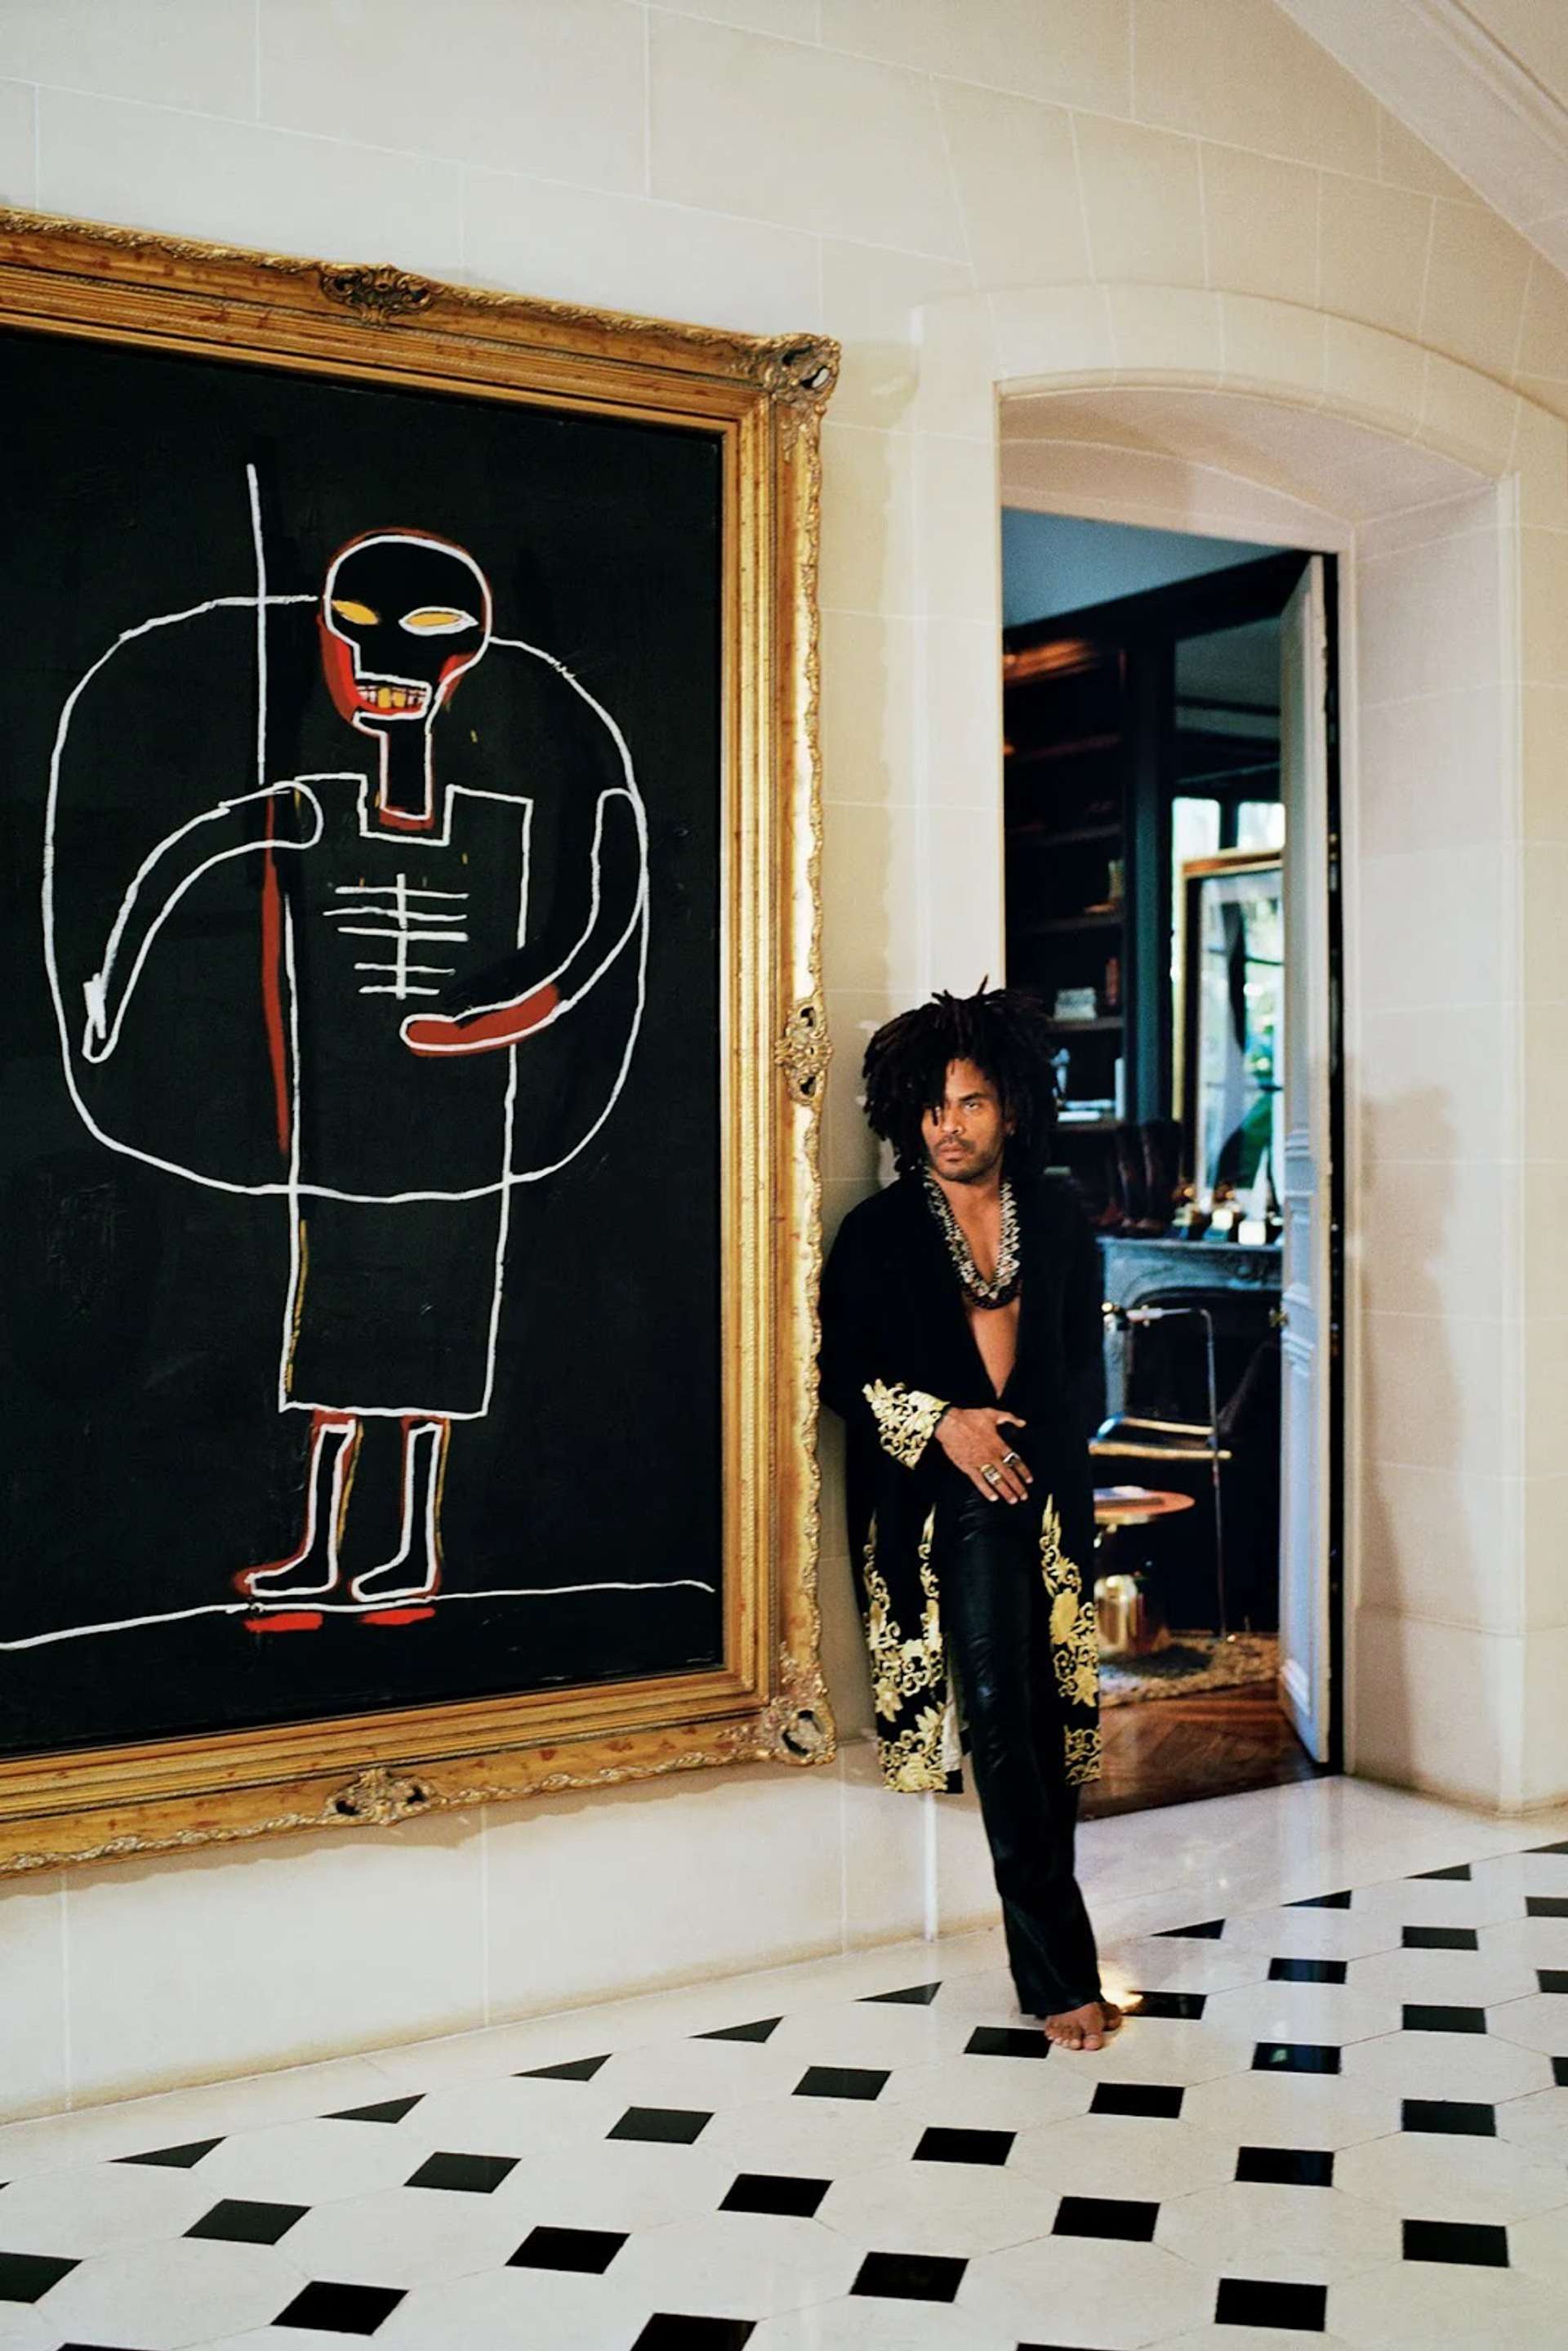 Photograph of Lenny Kravitz standing next to a Jean-Michele Basquiat painting in his home. Photograph of Lenny Kravitz standing next to a Jean-Michele Basquiat painting in his home. 